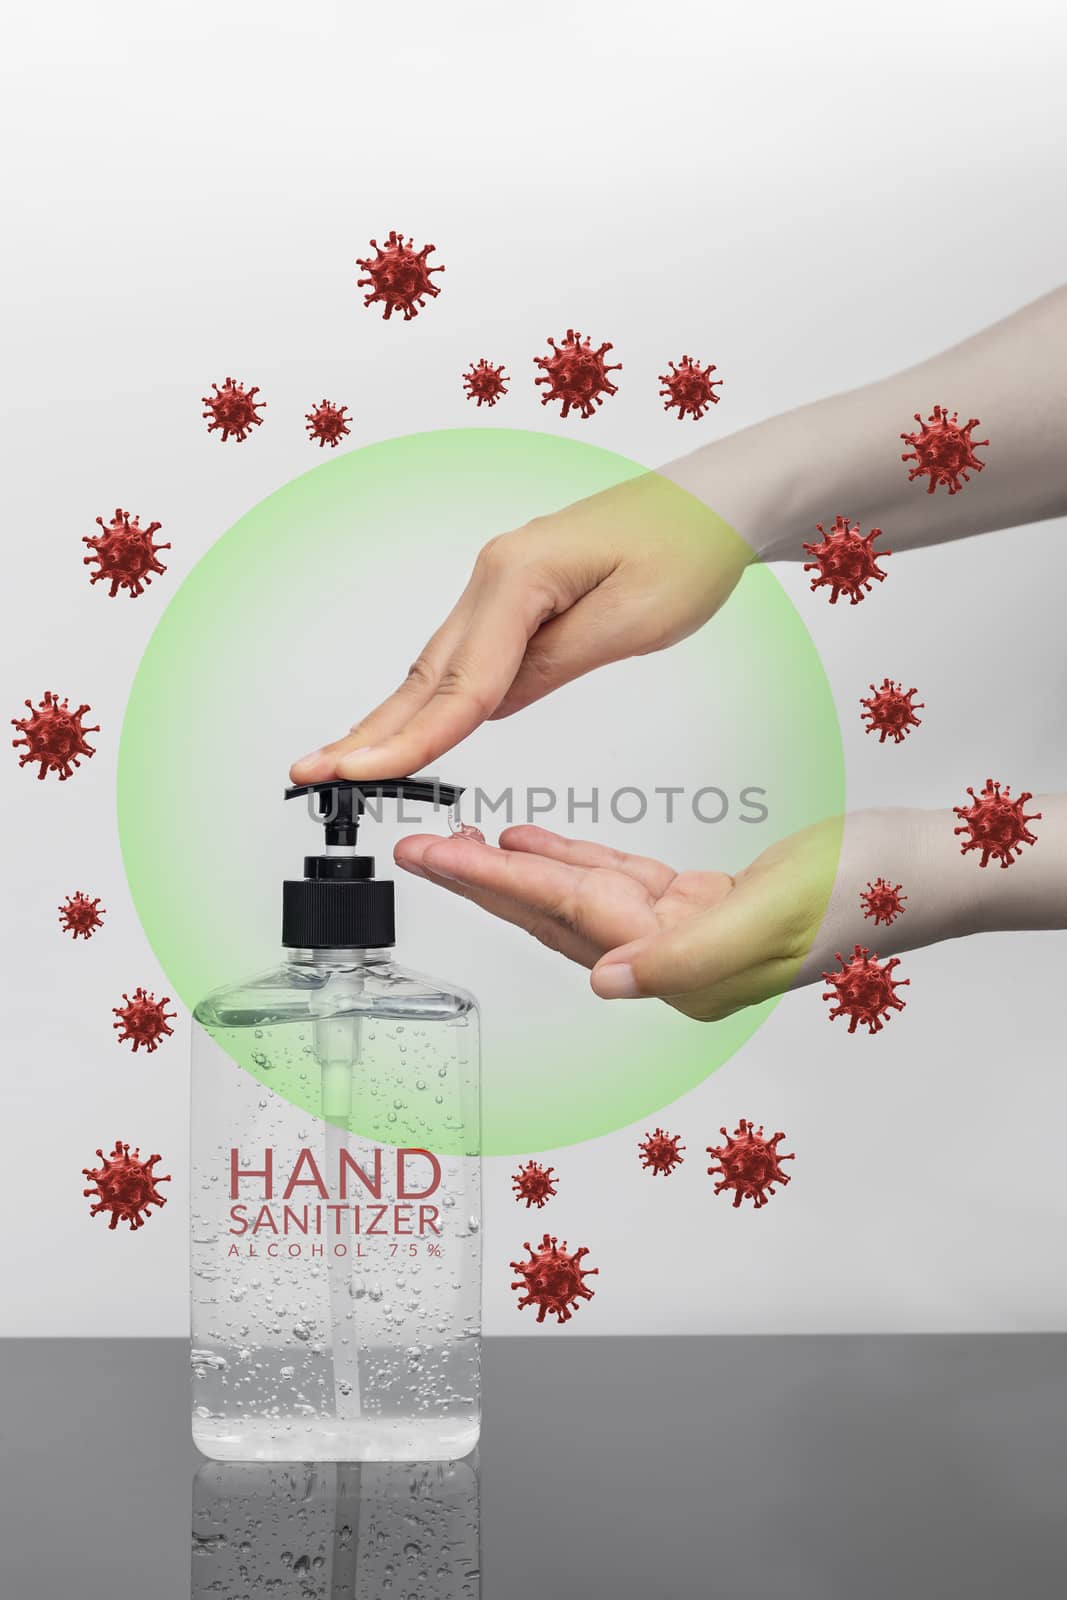 personal hygiene. people washing hand by hand sanitizer alcohol gel for cleaning and disinfection, prevention of spreading of germs with graphic of COVID-19 Coronavirus around